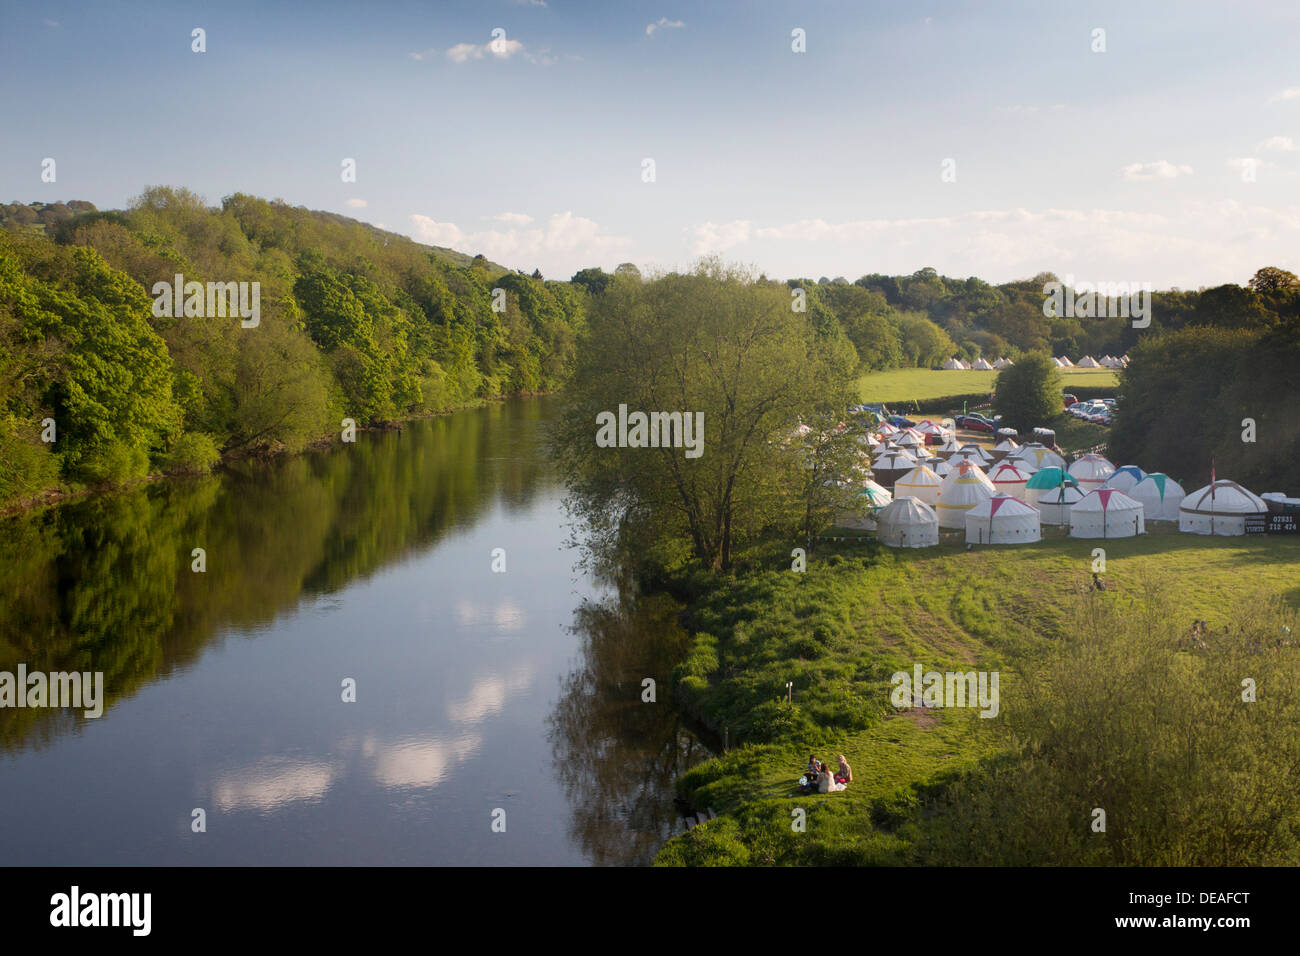 Yurts in field campsite by river Wye during festival Women sitting by river having picnic Hay-on-Wye Powys Wales UK Stock Photo